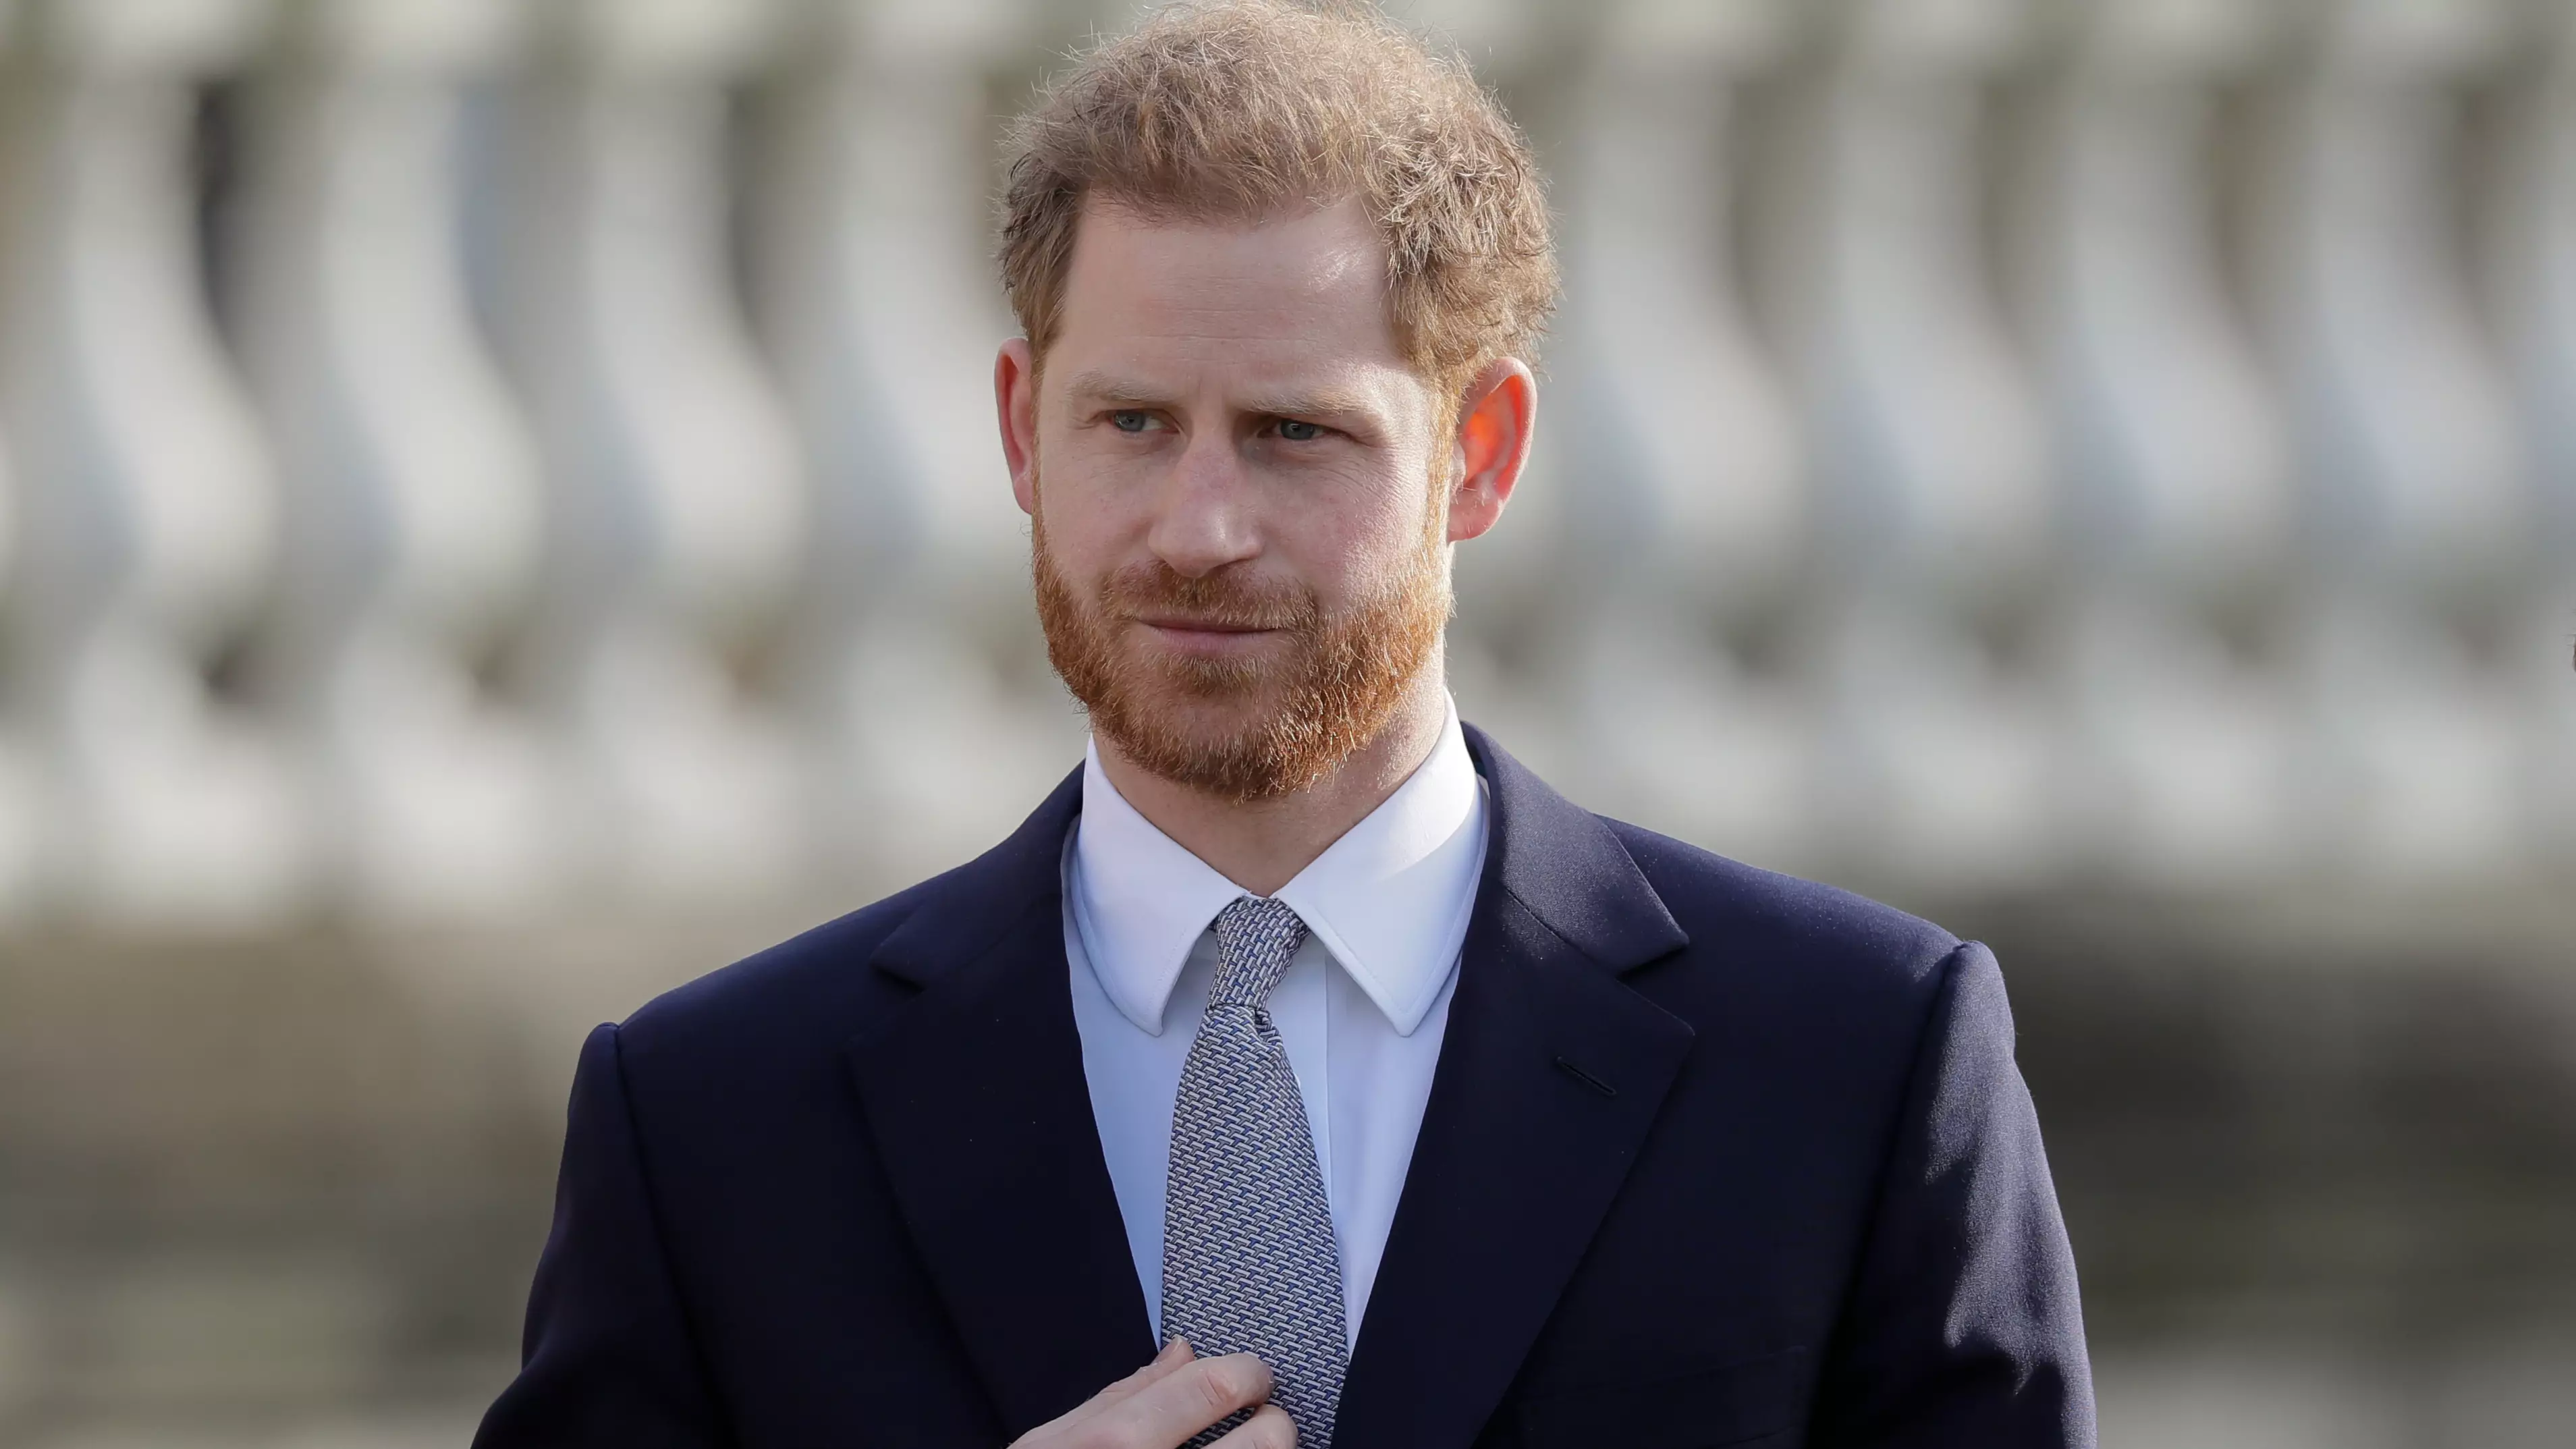 Prince Harry Reveals His 'Great Sadness' At Dropping HRH Title In Emotional Speech